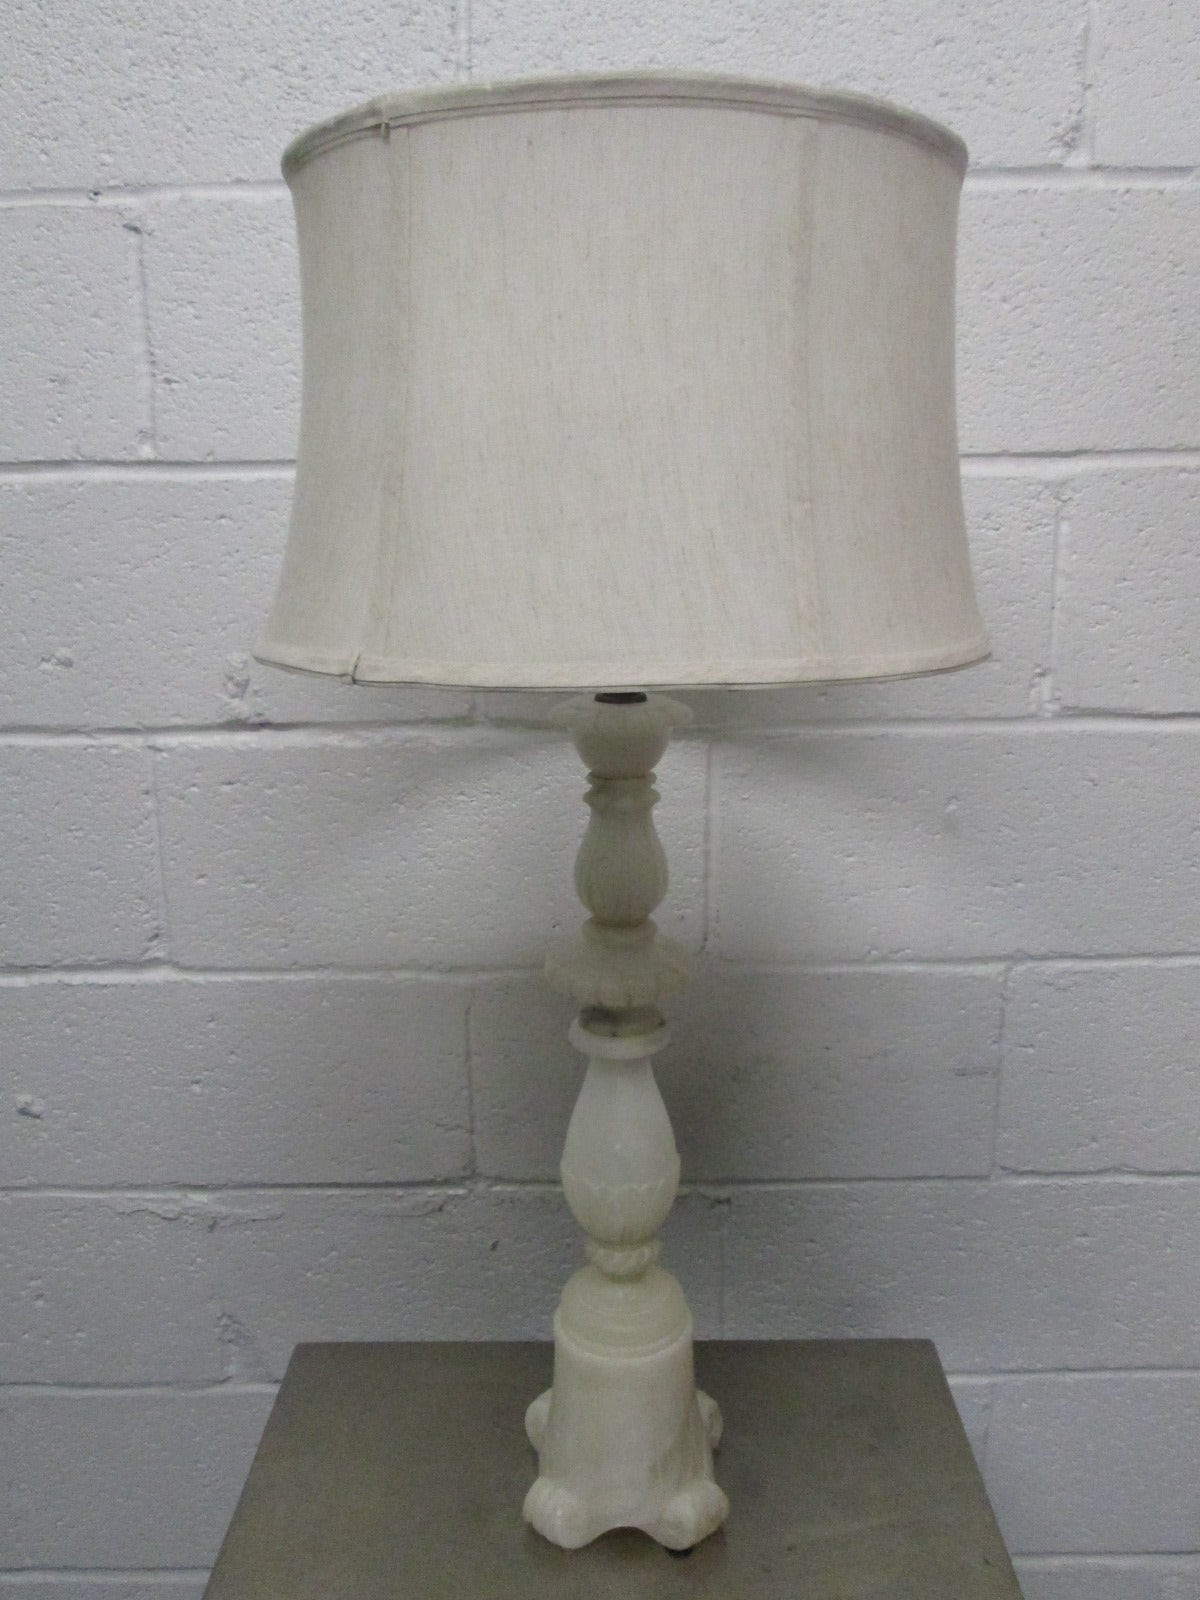 Pair French Neoclassical Style Alabaster Lamps.
Measures:  32.25